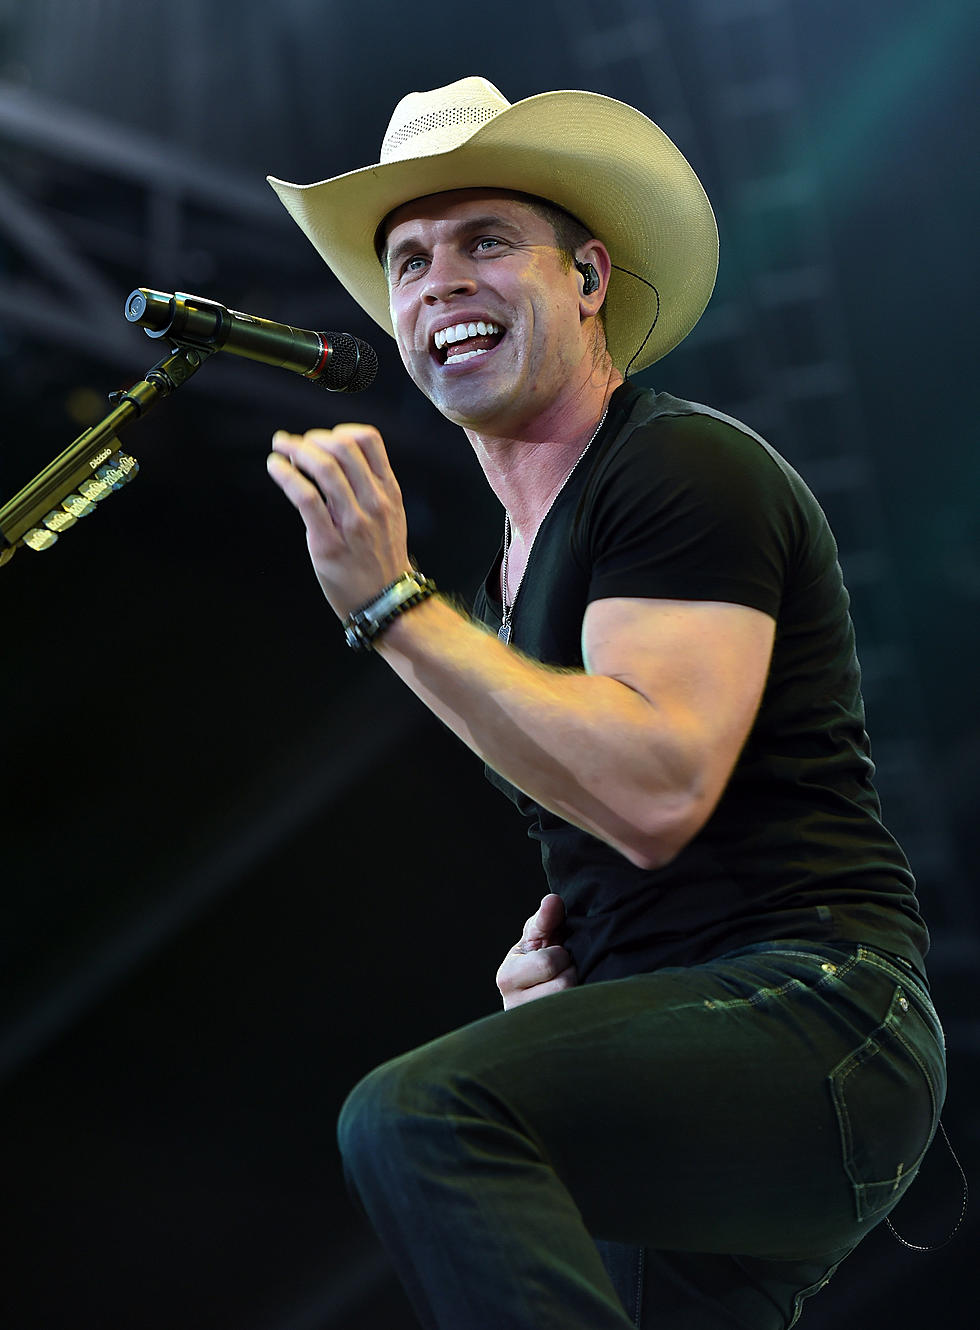 Did You Know Dustin Lynch Was In A Rock Cover Band?